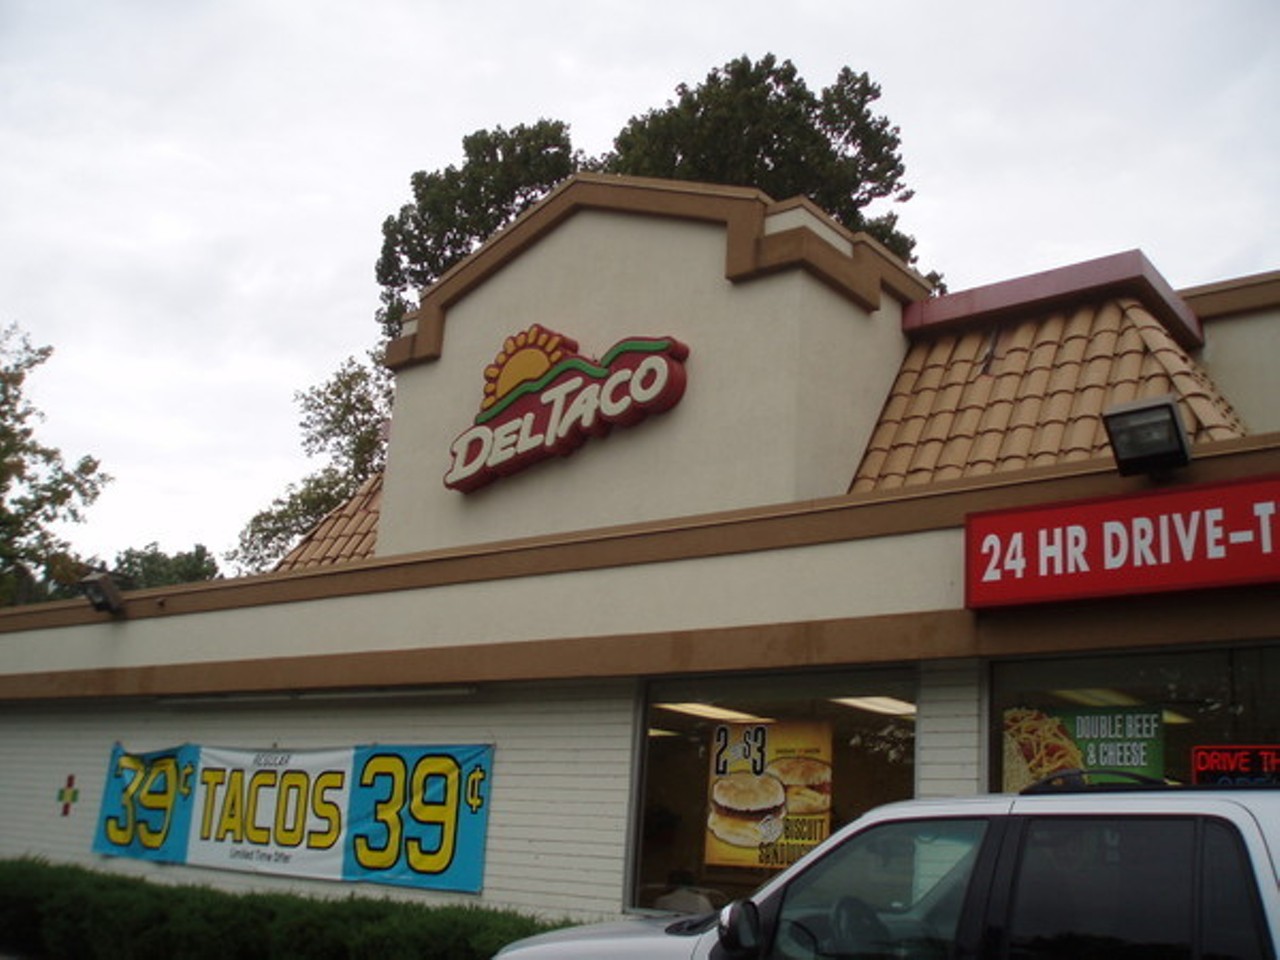 Del Taco-Richmond Heights | Richmond Heights | Fast Food ...